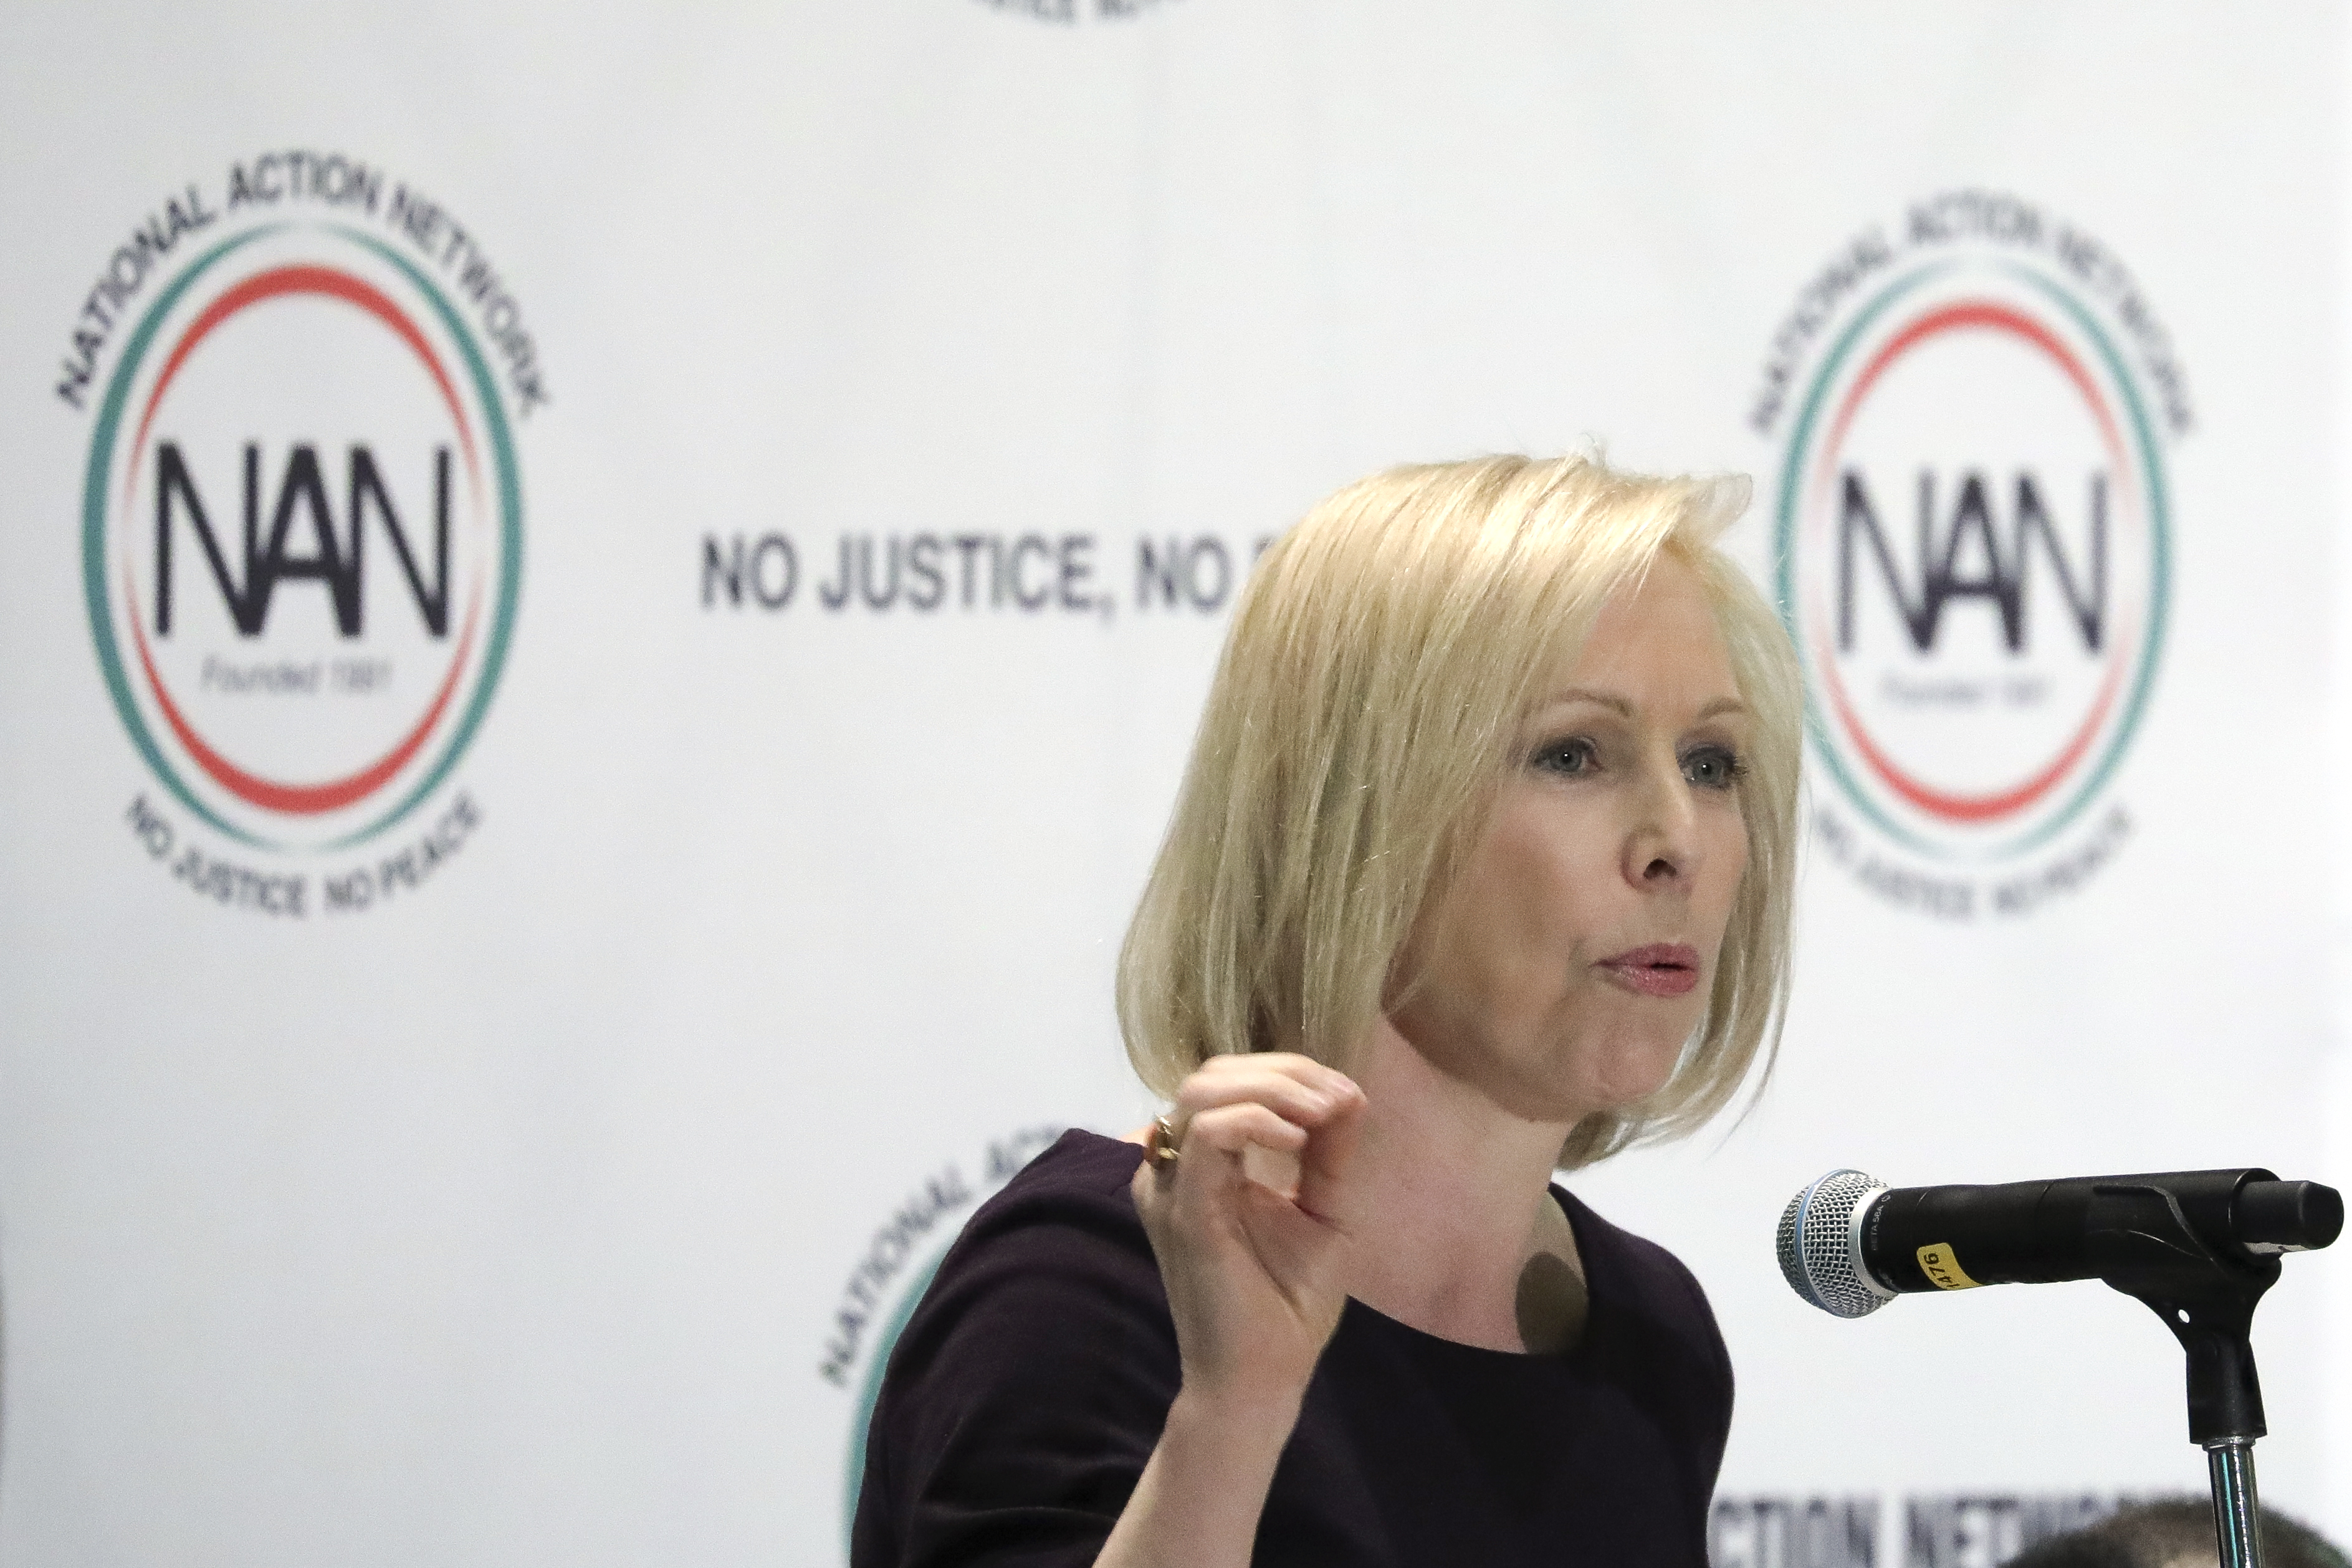 NEW YORK, NY - APRIL 5: Democratic presidential candidate Sen. Kirsten Gillibrand (D-NY) speaks at the National Action Network's annual convention, April 5, 2019 in New York City. A dozen 2020 Democratic presidential candidates are speaking at the organization's convention this week. Founded by Rev. Al Sharpton in 1991, the National Action Network is one of the most influential African American organizations dedicated to civil rights in America. (Photo by Drew Angerer/Getty Images)